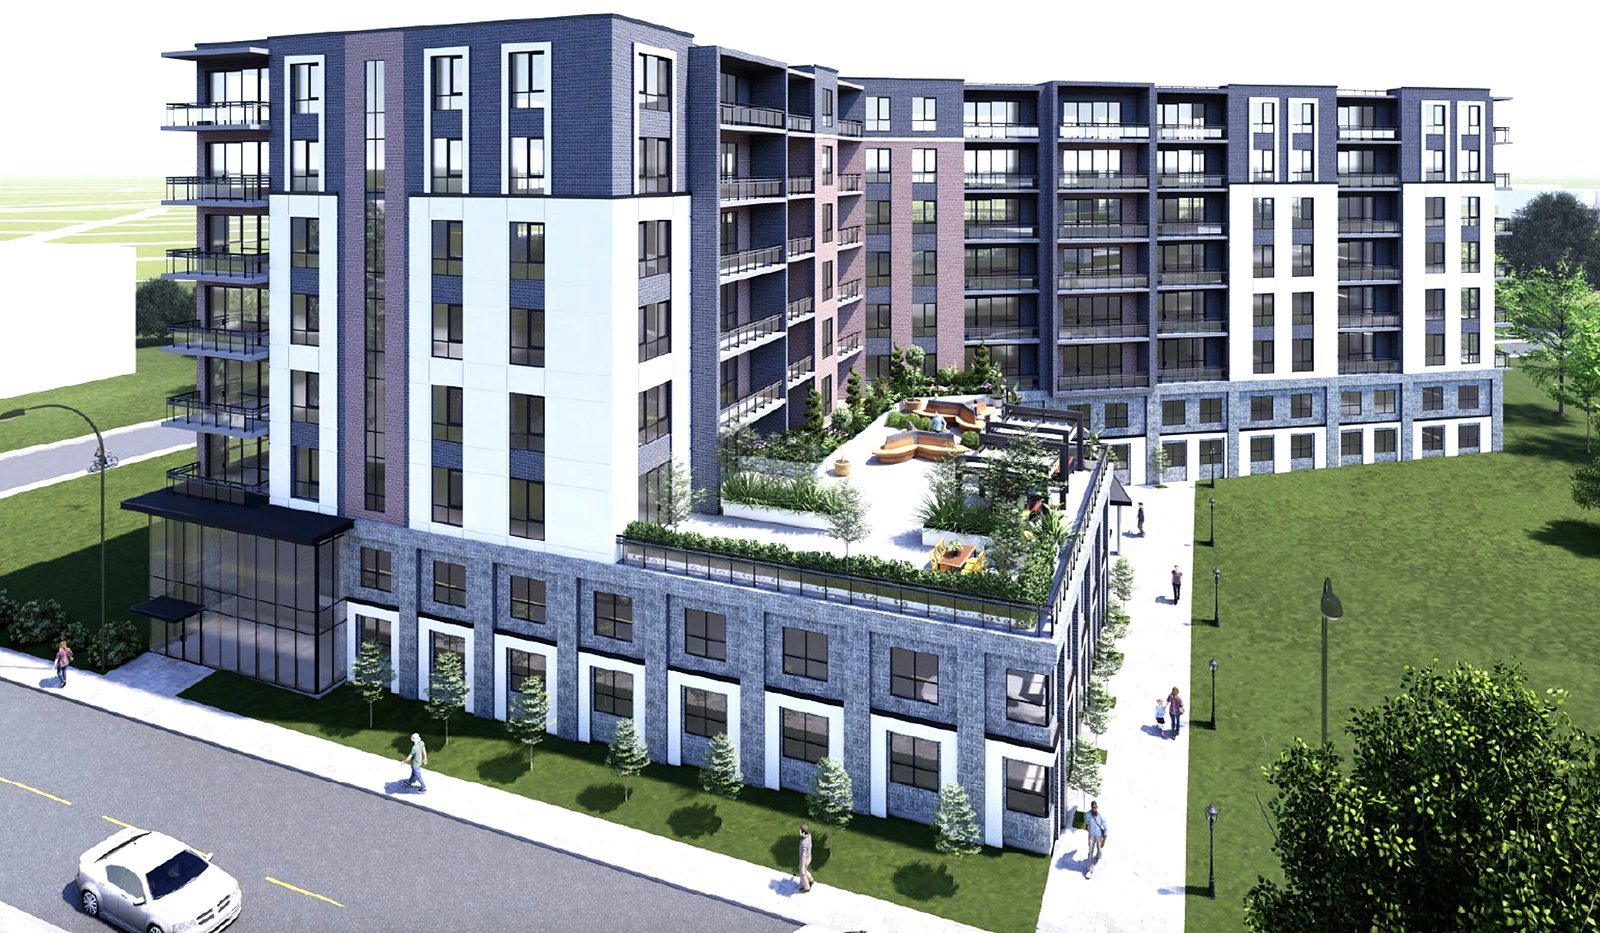 A 104-unit residential development has been proposed at 149 Ainslie St. N.